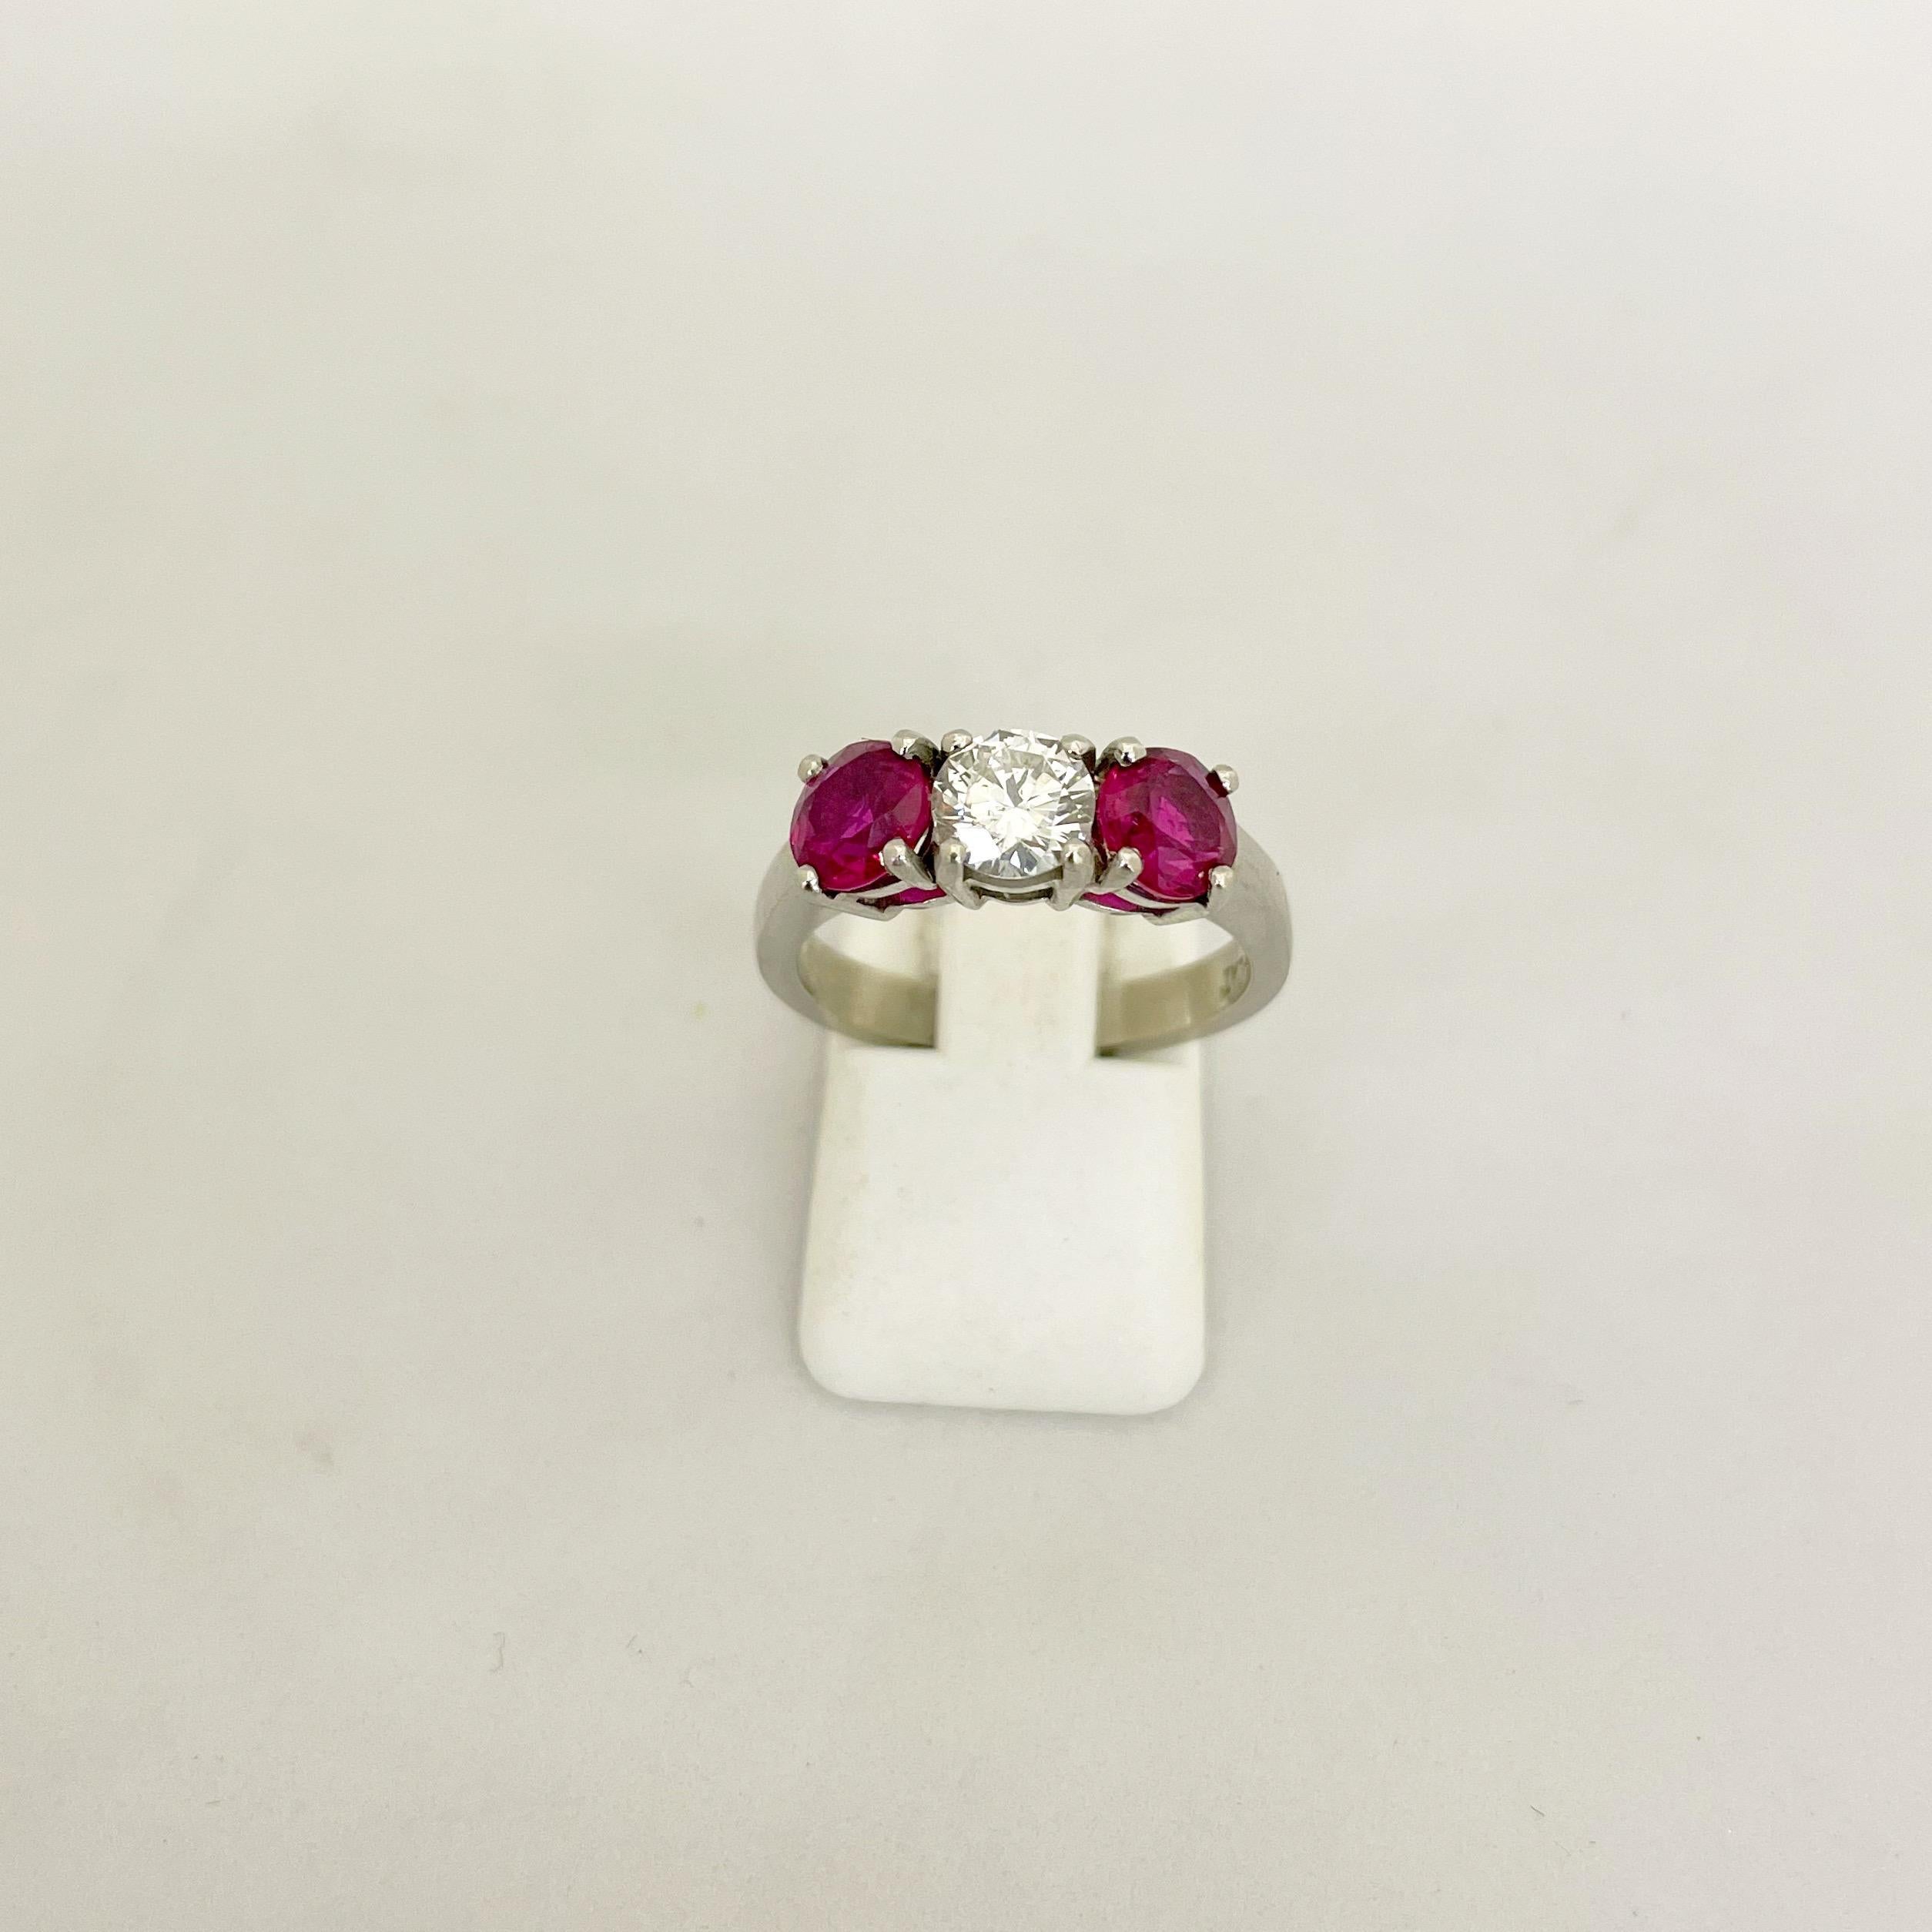 Classic 3 stone platinum ring. This ring centers a round brilliant diamond weighing 0.61 carats. The center diamond is flanked by 2 round brilliant rubies with a total weight of 1.63 carats.
Finger size 6-3/4 sizing available
Appraisal upon request